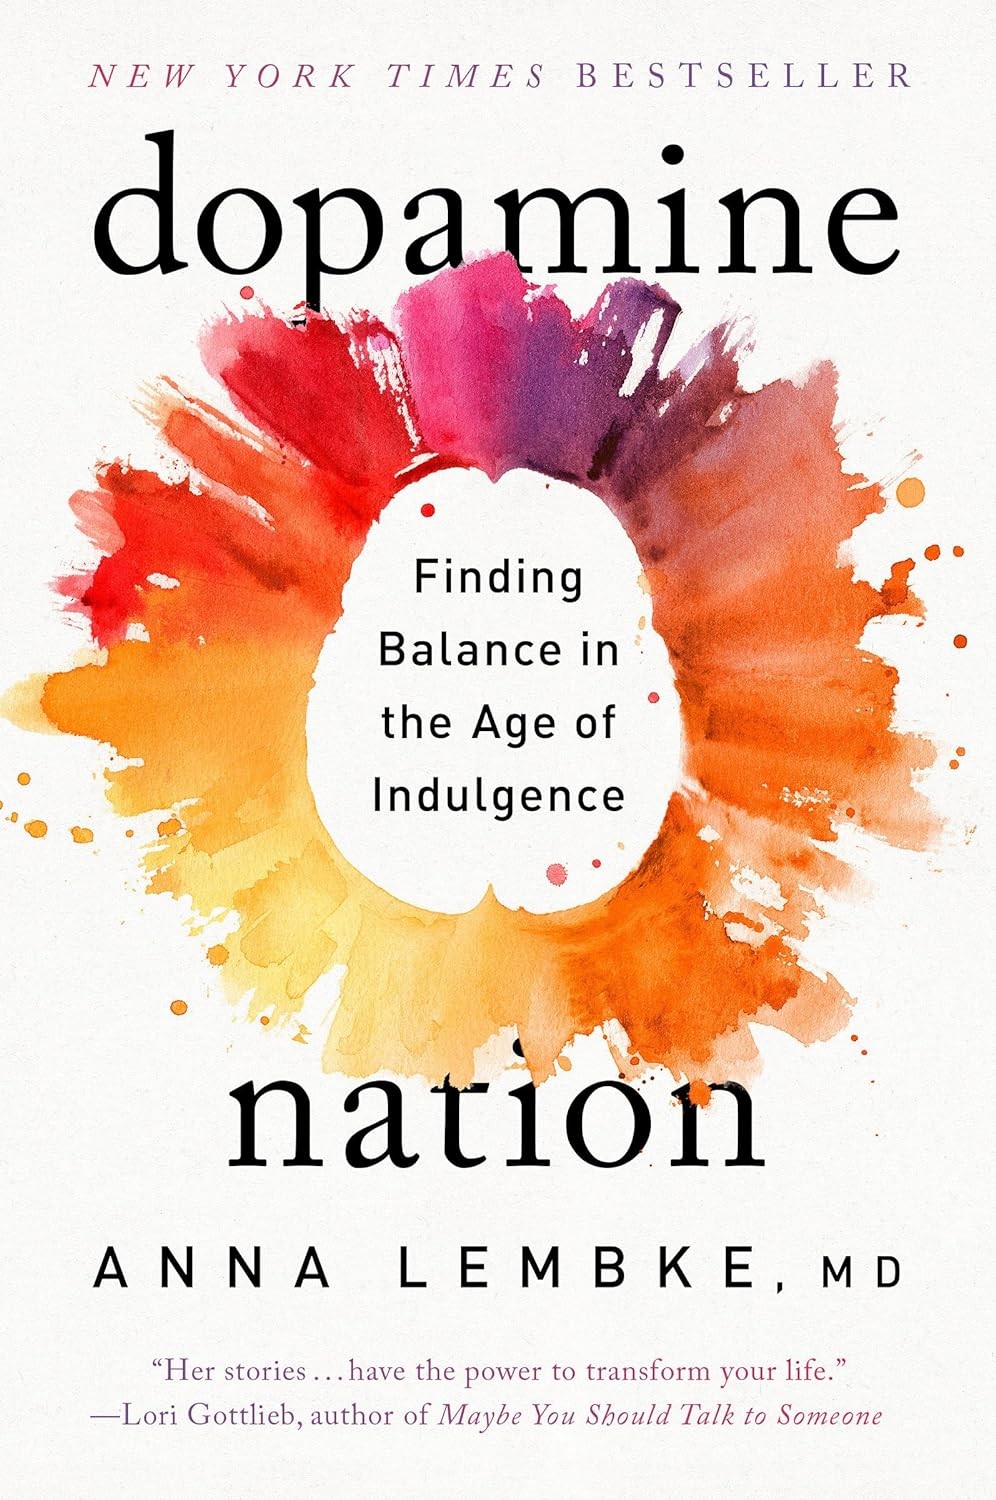 <p>In <em>Dopamine Nation</em>, Dr. Anna Lembke shows us how to find balance between pleasure and pain — and how to live in a world full of overconsumption and high-dopamine stimuli. You don't need to be a neuroscientist to understand this book, or to enjoy it!</p><p><em>Dopamine Nation has a 4.6 rating on Amazon and 3.9 on Goodreads, both out of 5.</em></p><p>Like Brit + Co's content? <a href="https://www.msn.com/en-us/channel/source/BRITCO/sr-vid-mwh45mxjpbgutp55qr3ca3bnmhxae80xpqj0vw80yesb5g0h5q2a?cvid=6efac0aec71d460989f862c7f33ea985&ei=106">Be sure to follow us for more! </a> </p>